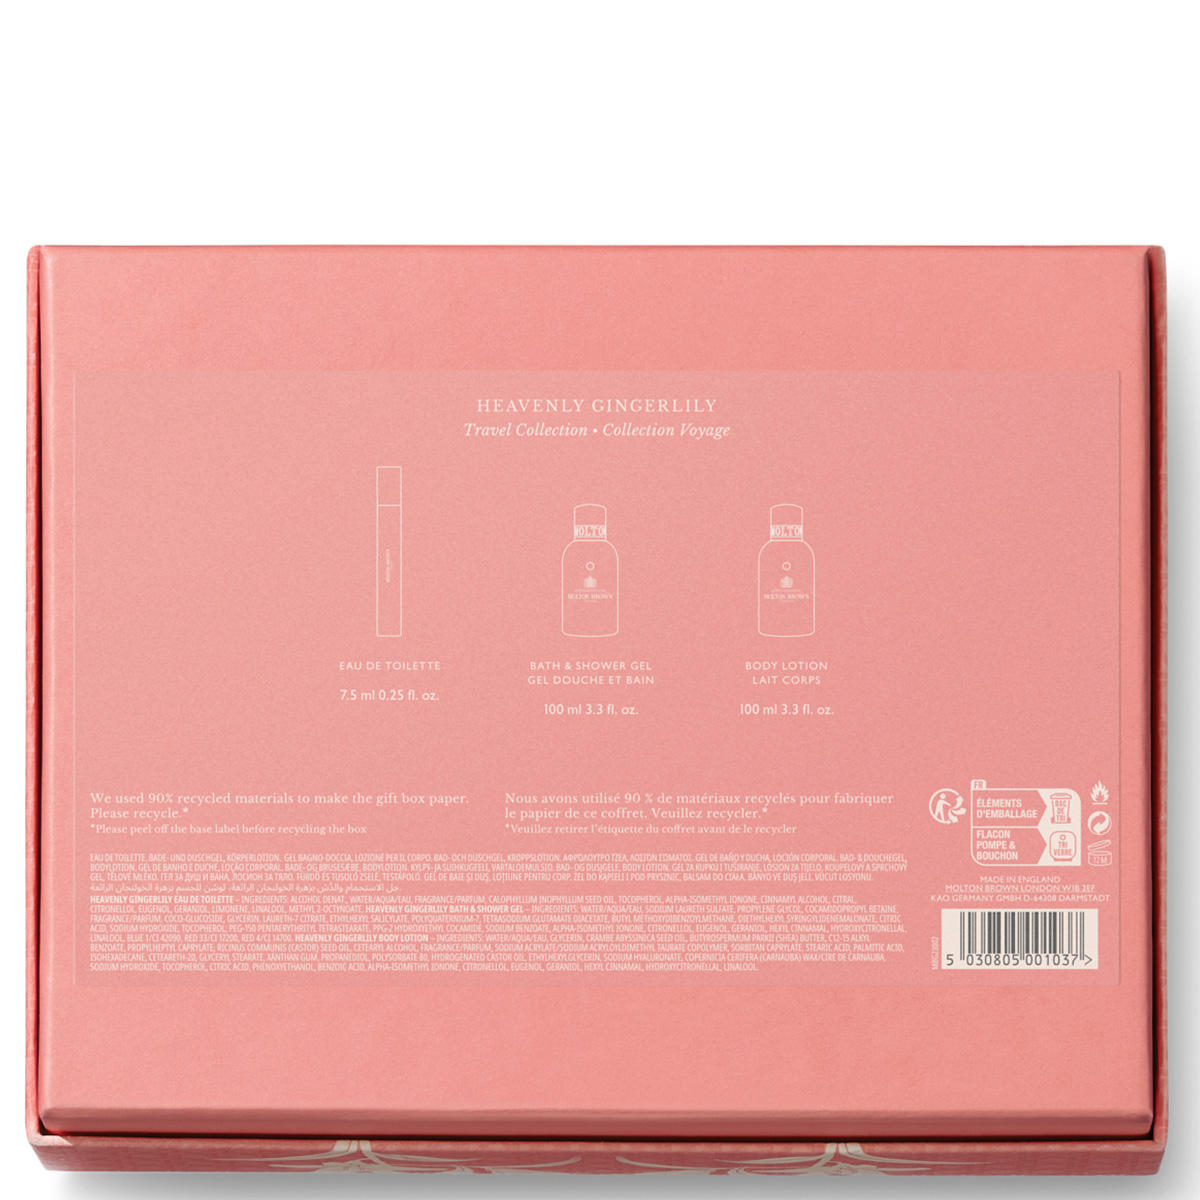 MOLTON BROWN Heavenly Gingerlily Travel Gift Set Limited Edition  - 3